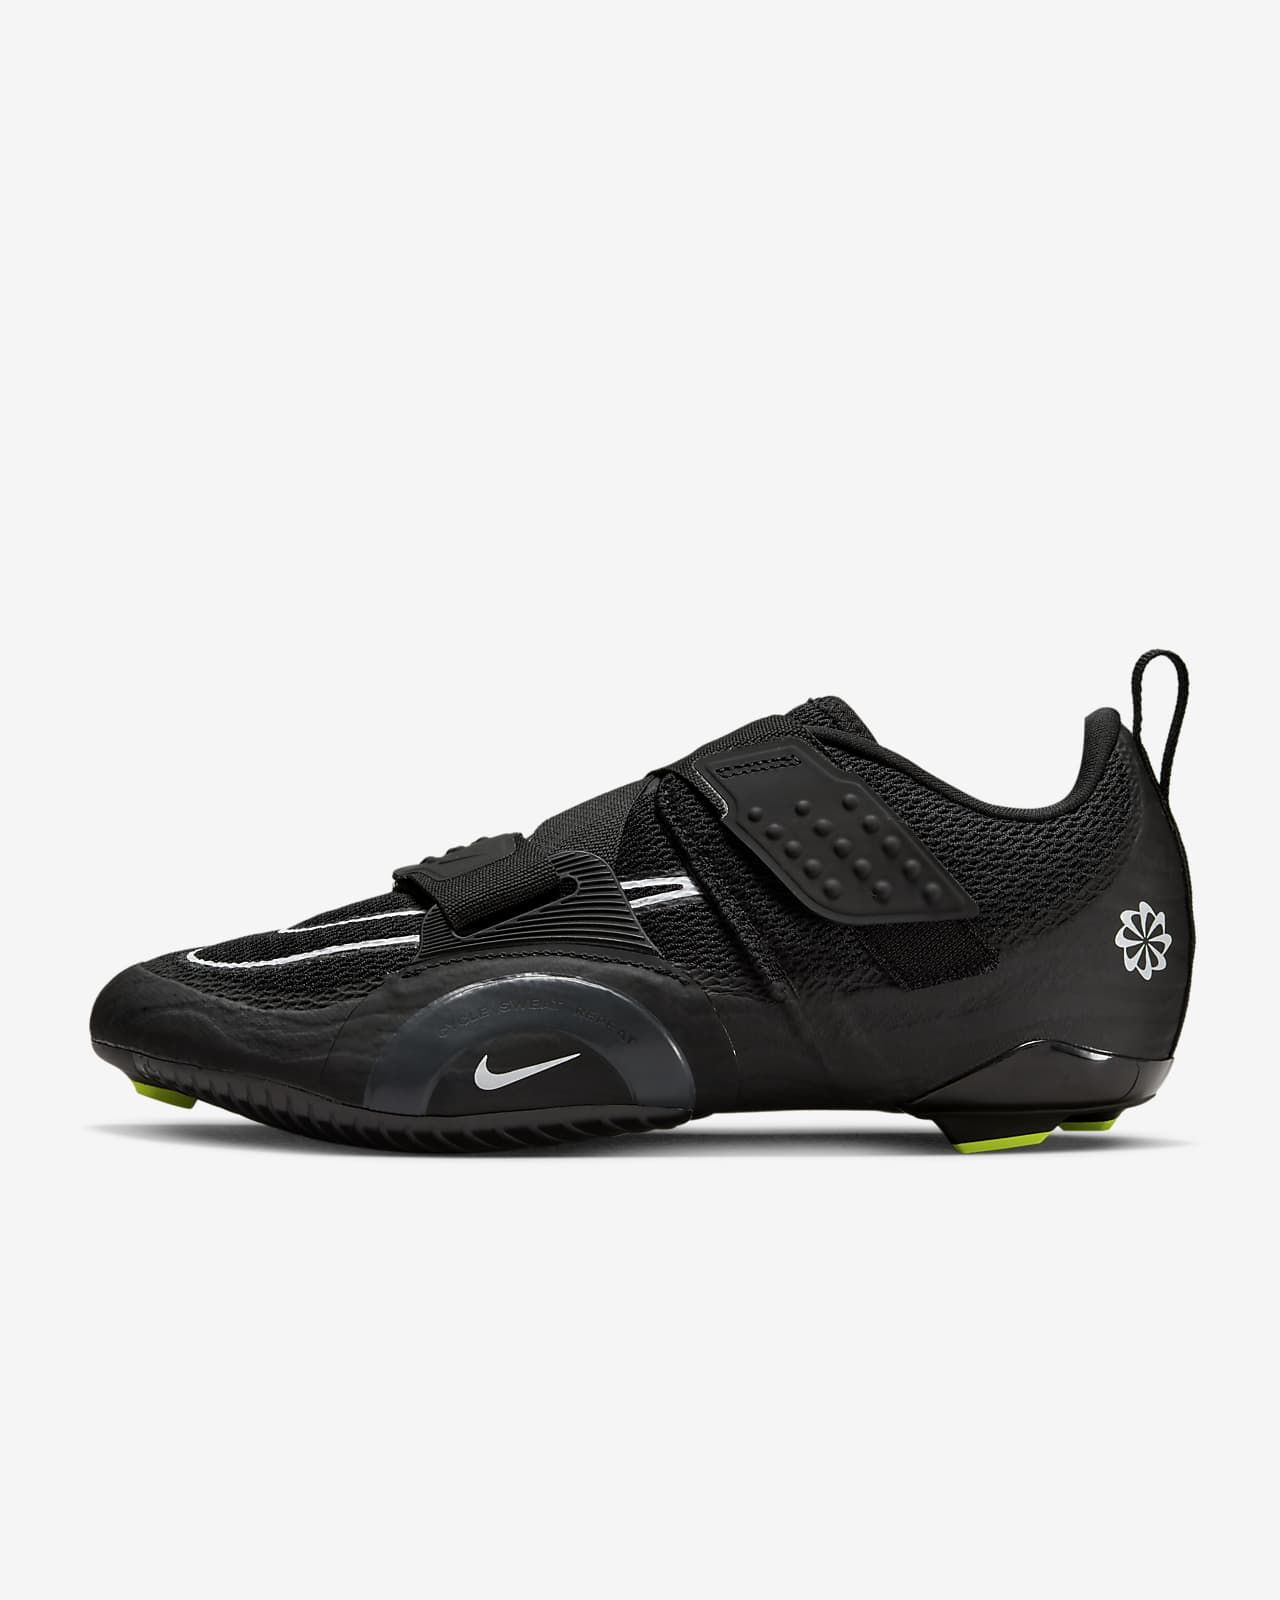 Nike SuperRep Cycle 2 Next Nature Indoor Cycling Shoes. Nike.com | Nike (US)